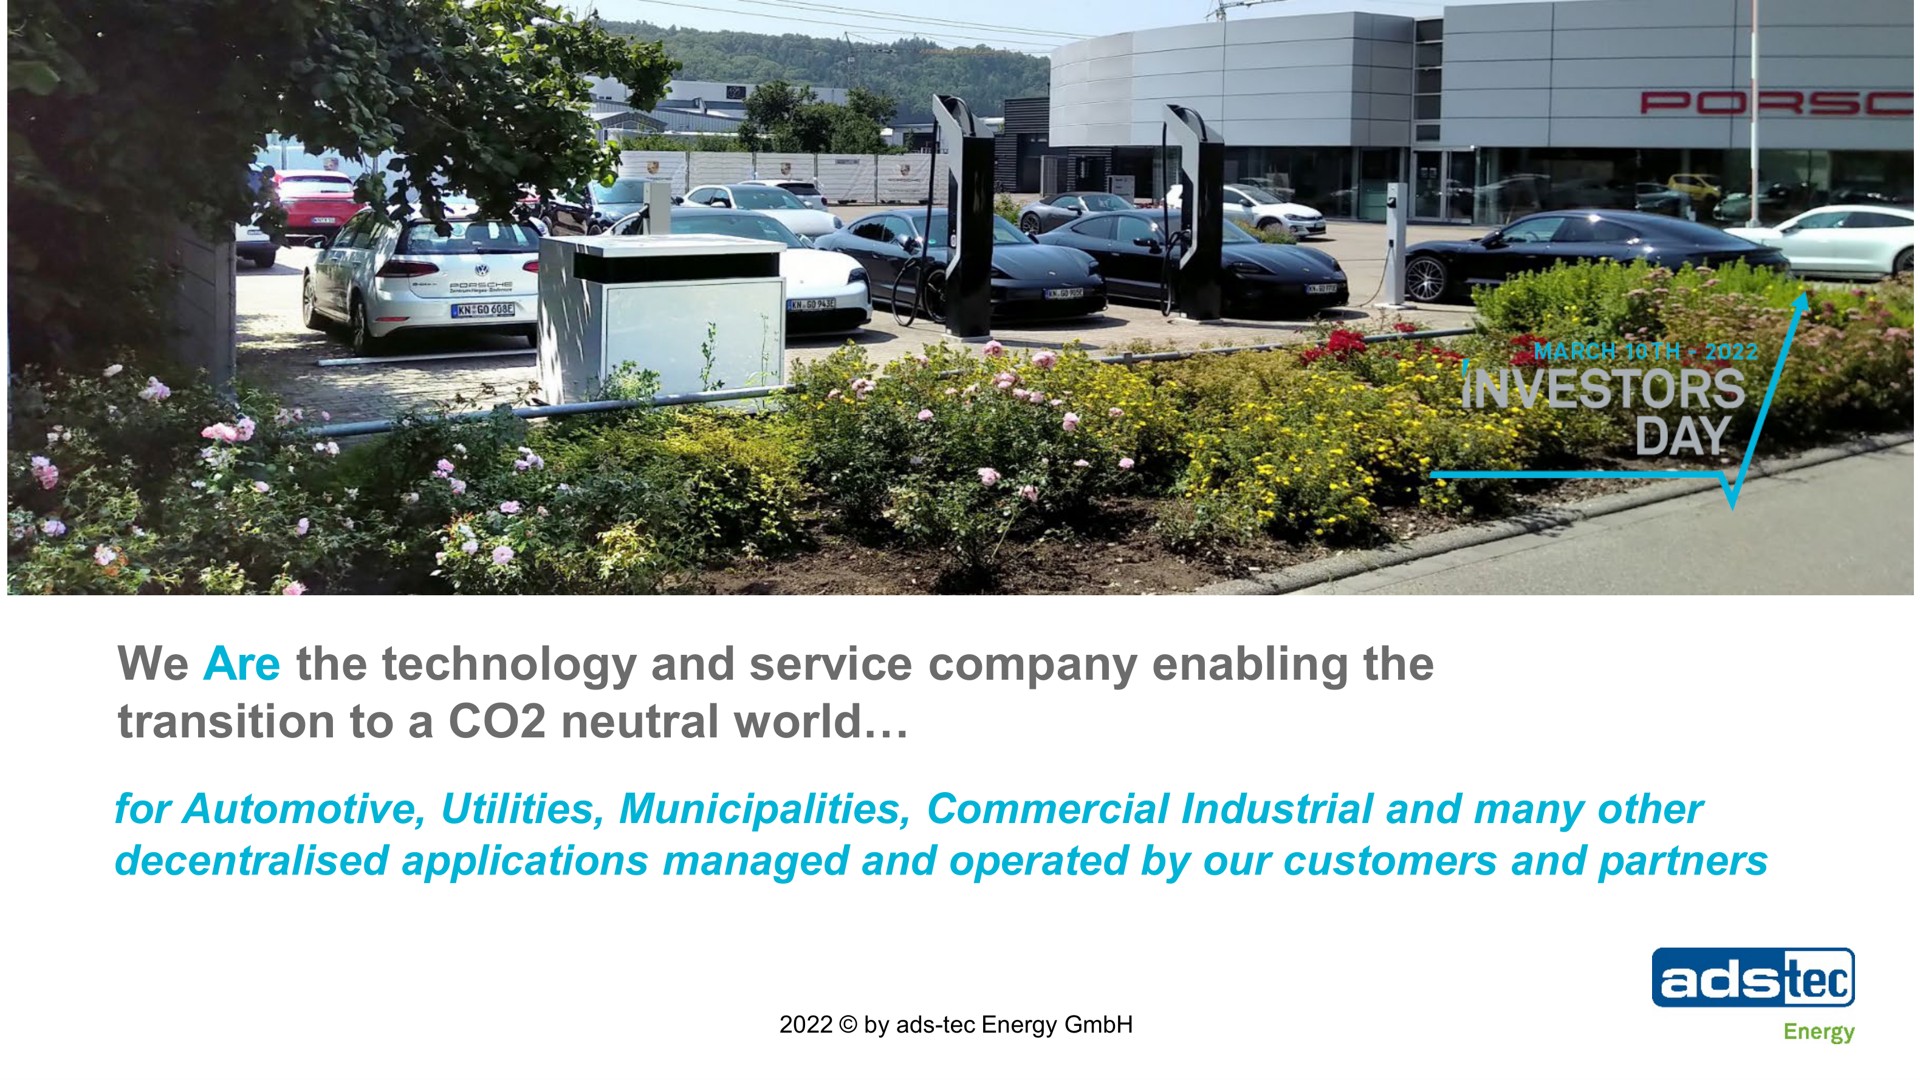 we are the technology and service company enabling the transition to a neutral world for automotive utilities municipalities commercial industrial and many other applications managed and operated by our customers and partners | ads-tec Energy